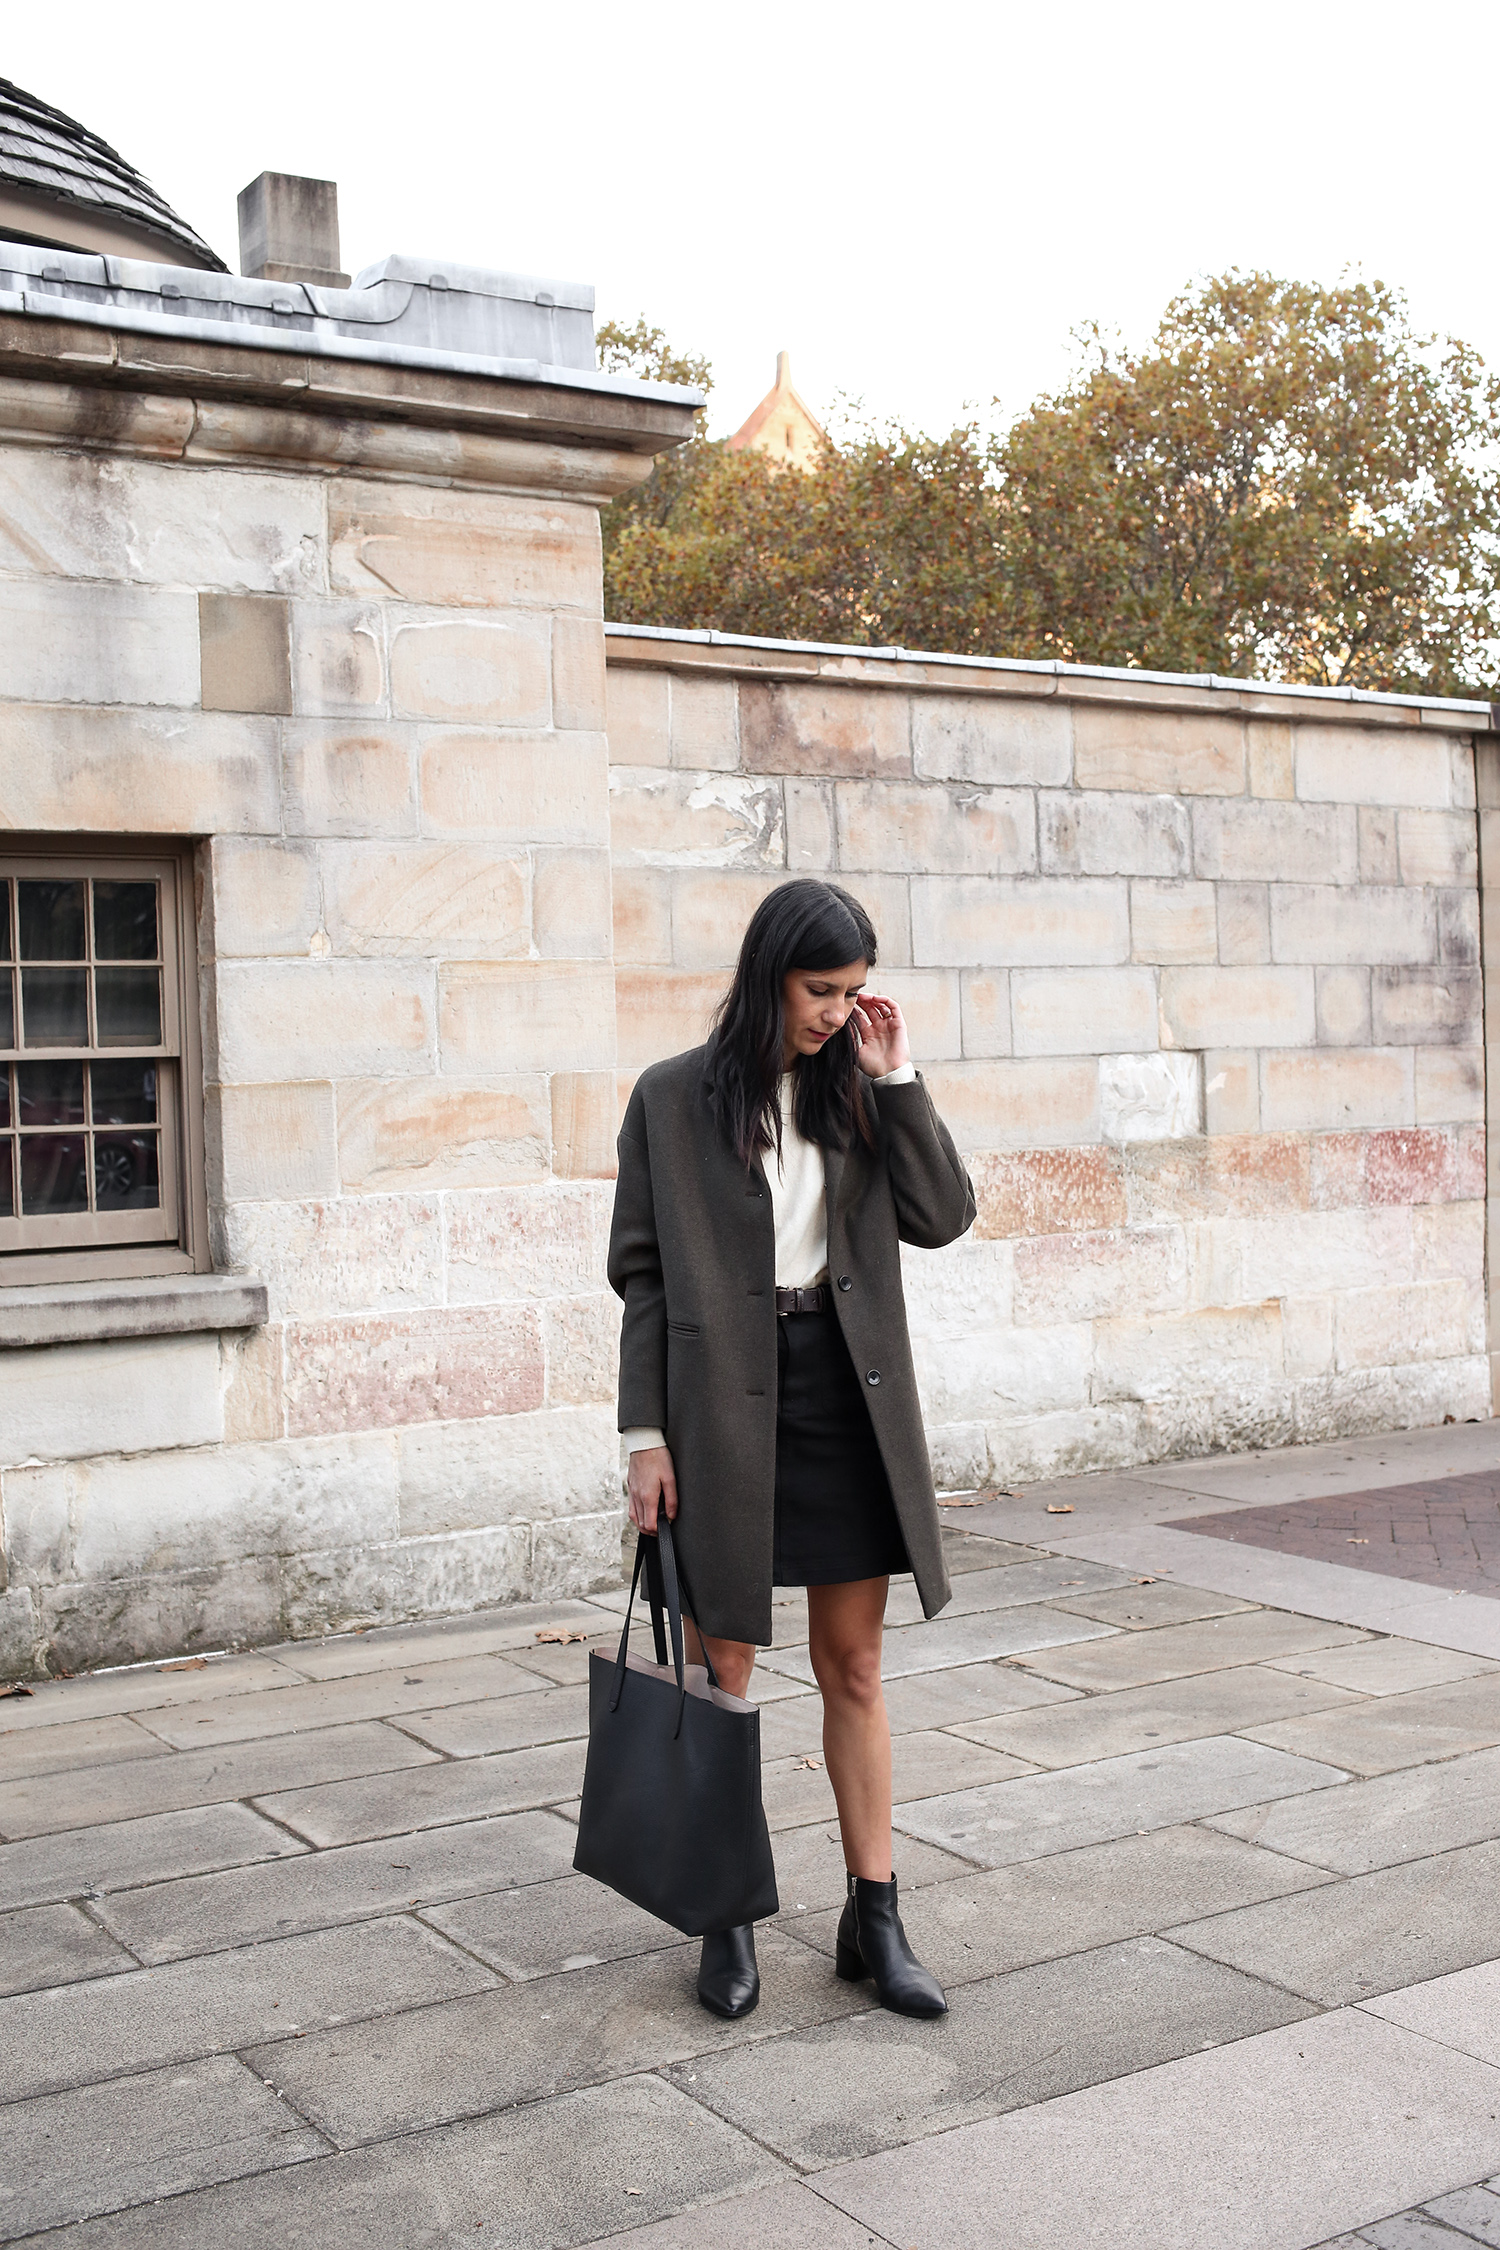 Jamie Lee Mademoiselle wearing an Autumn Minimal Style Outfit of a cashmere sweater with mini skirt and boots